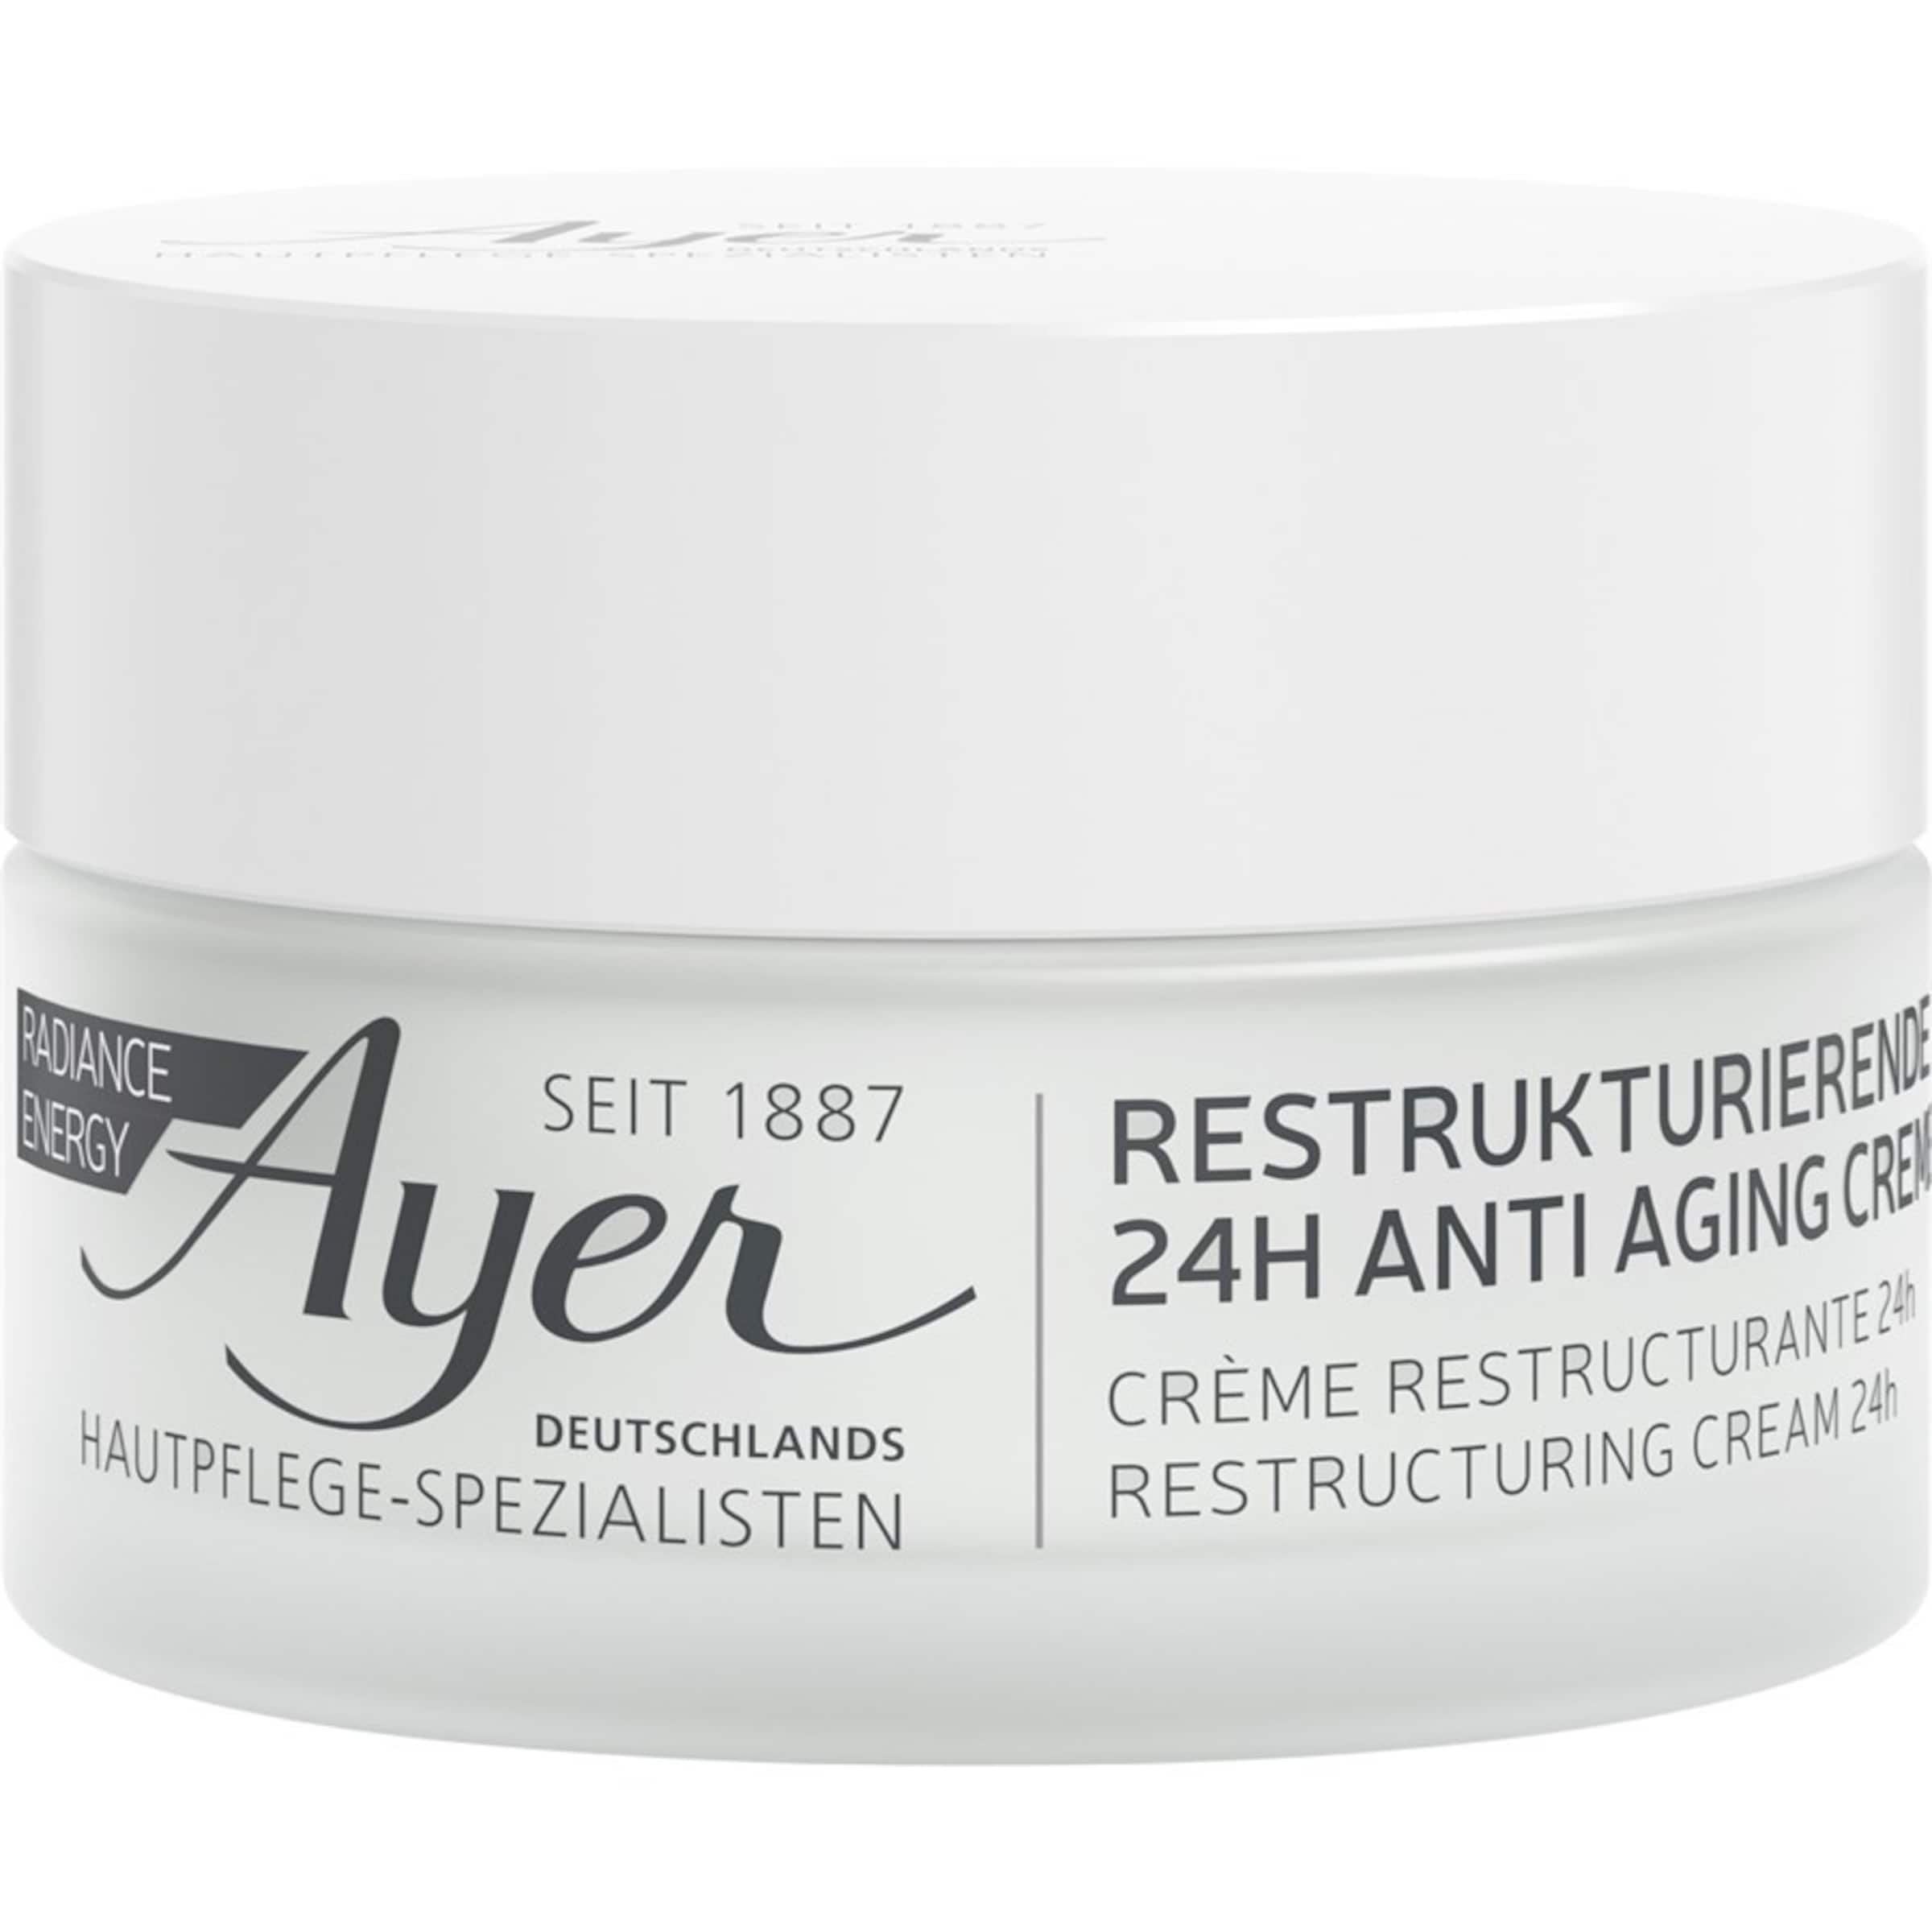 Ayer Tagespflege Restructuring Cream 24h in 